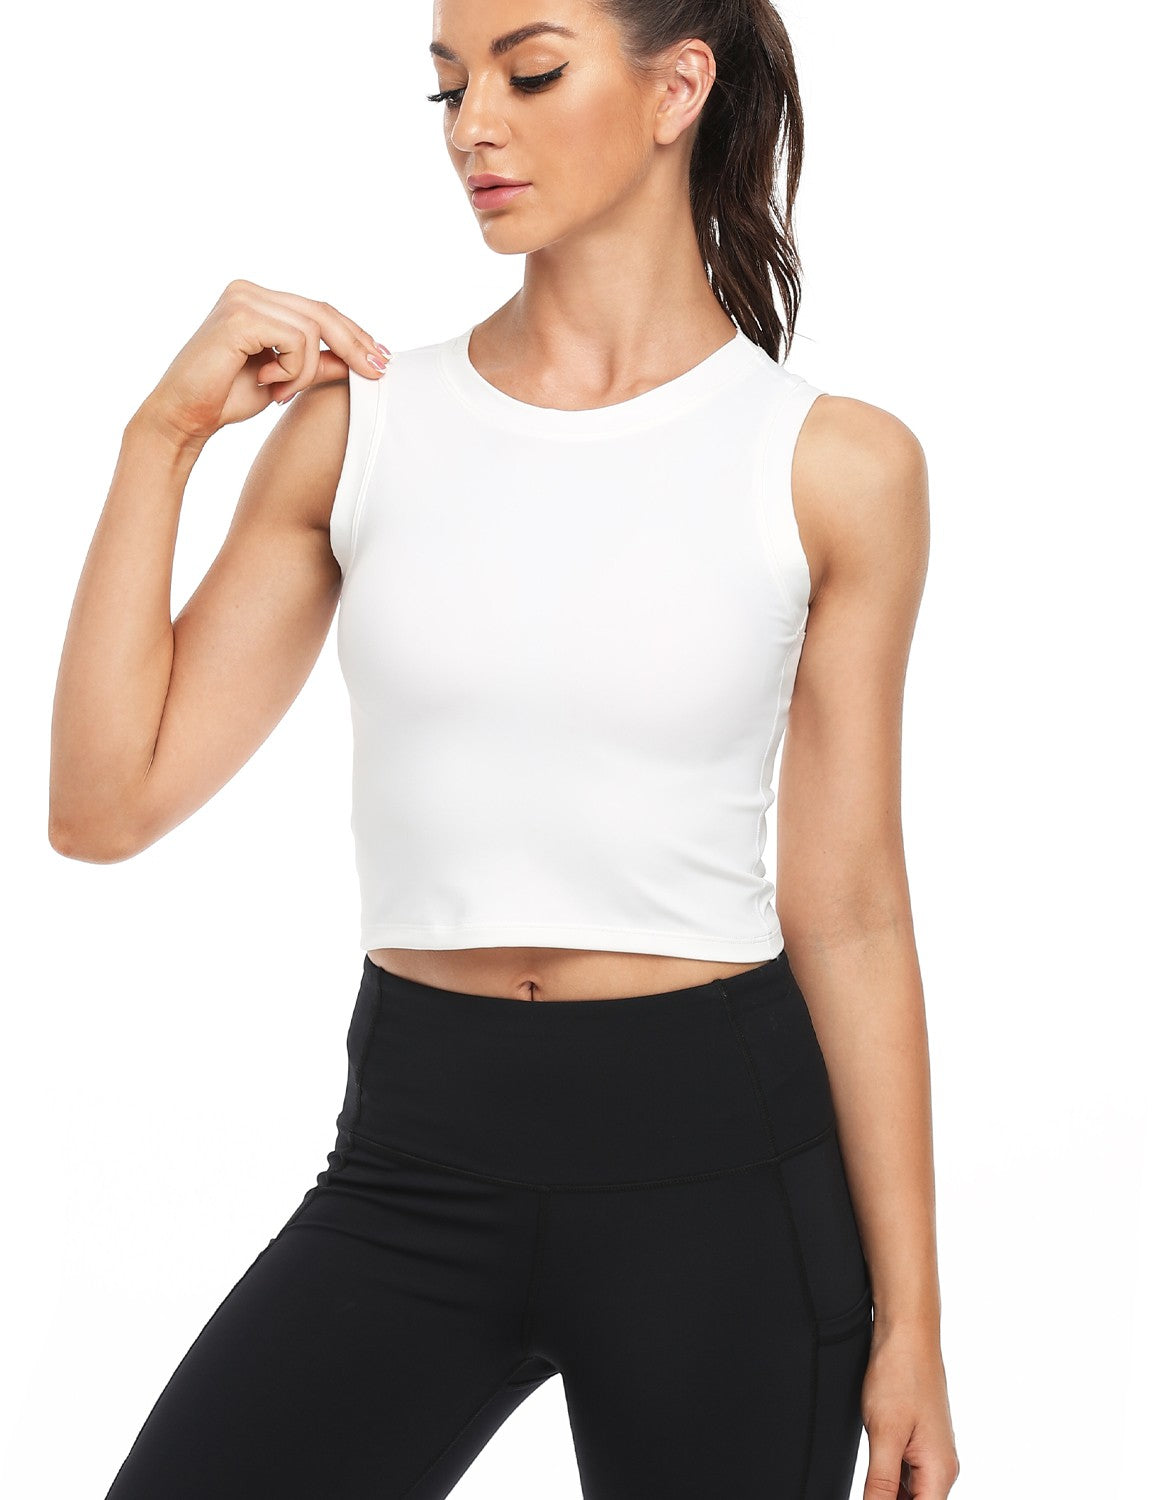 HeyNuts Wherever Crop Top for Women Workout Wirefree Kenya